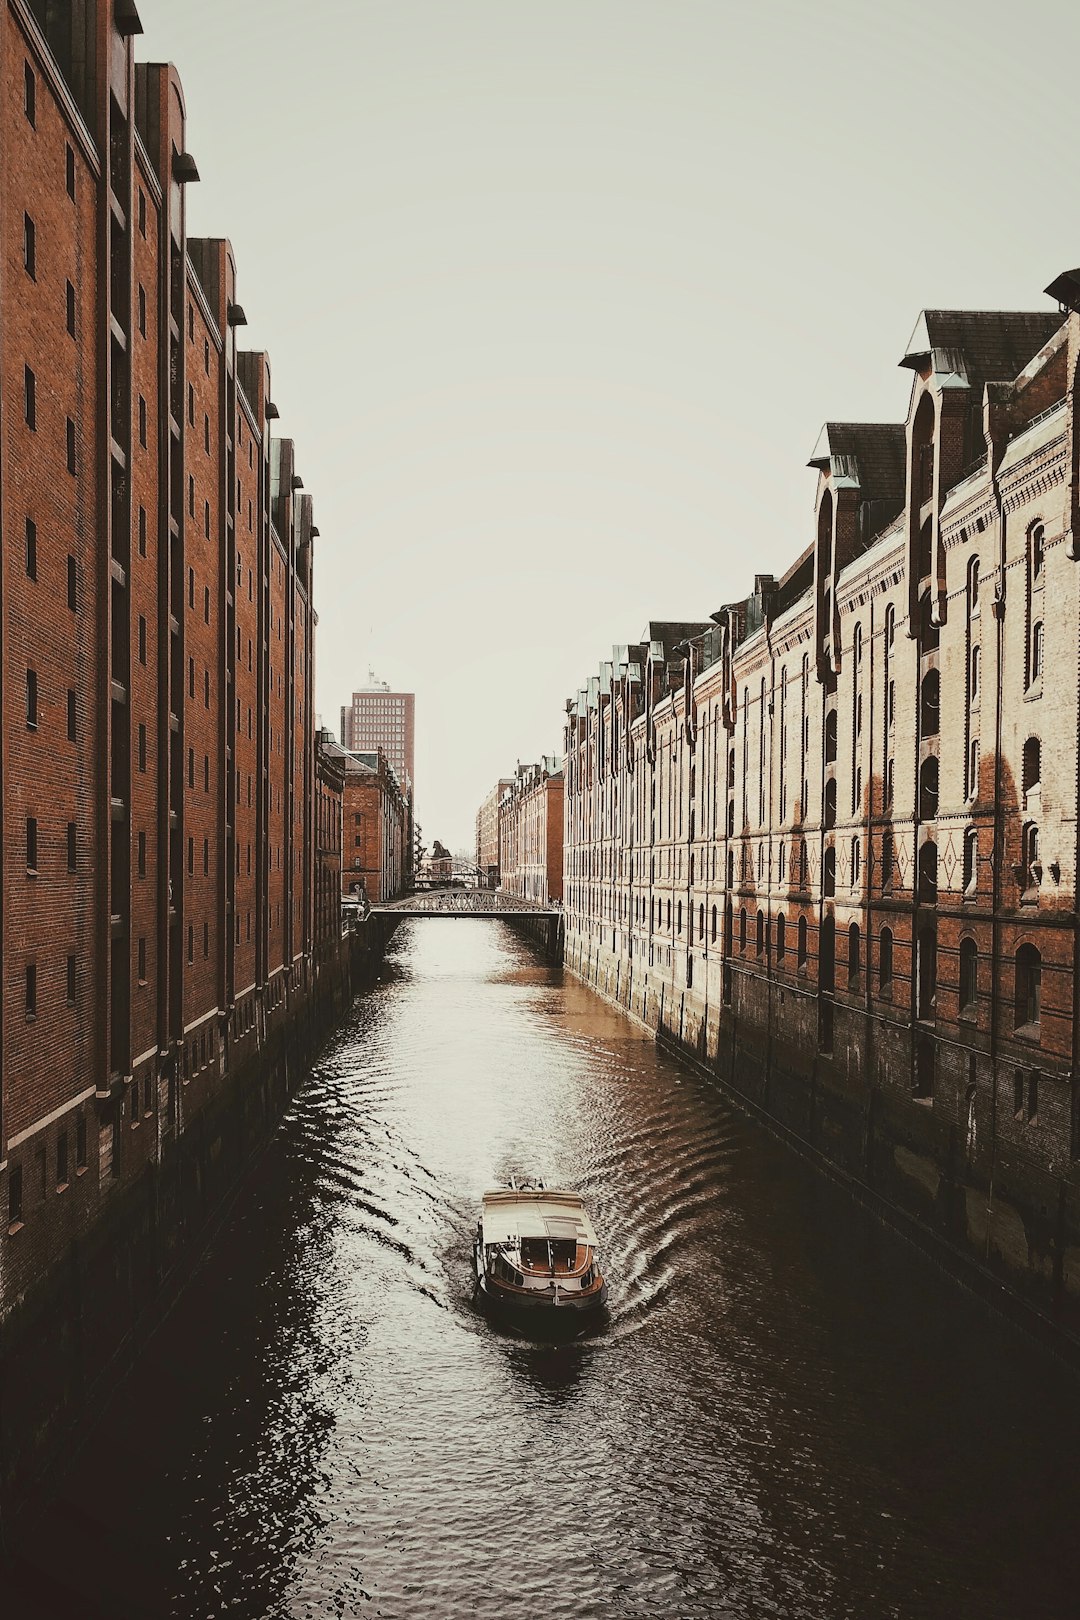 travelers stories about Town in HafenCity, Germany